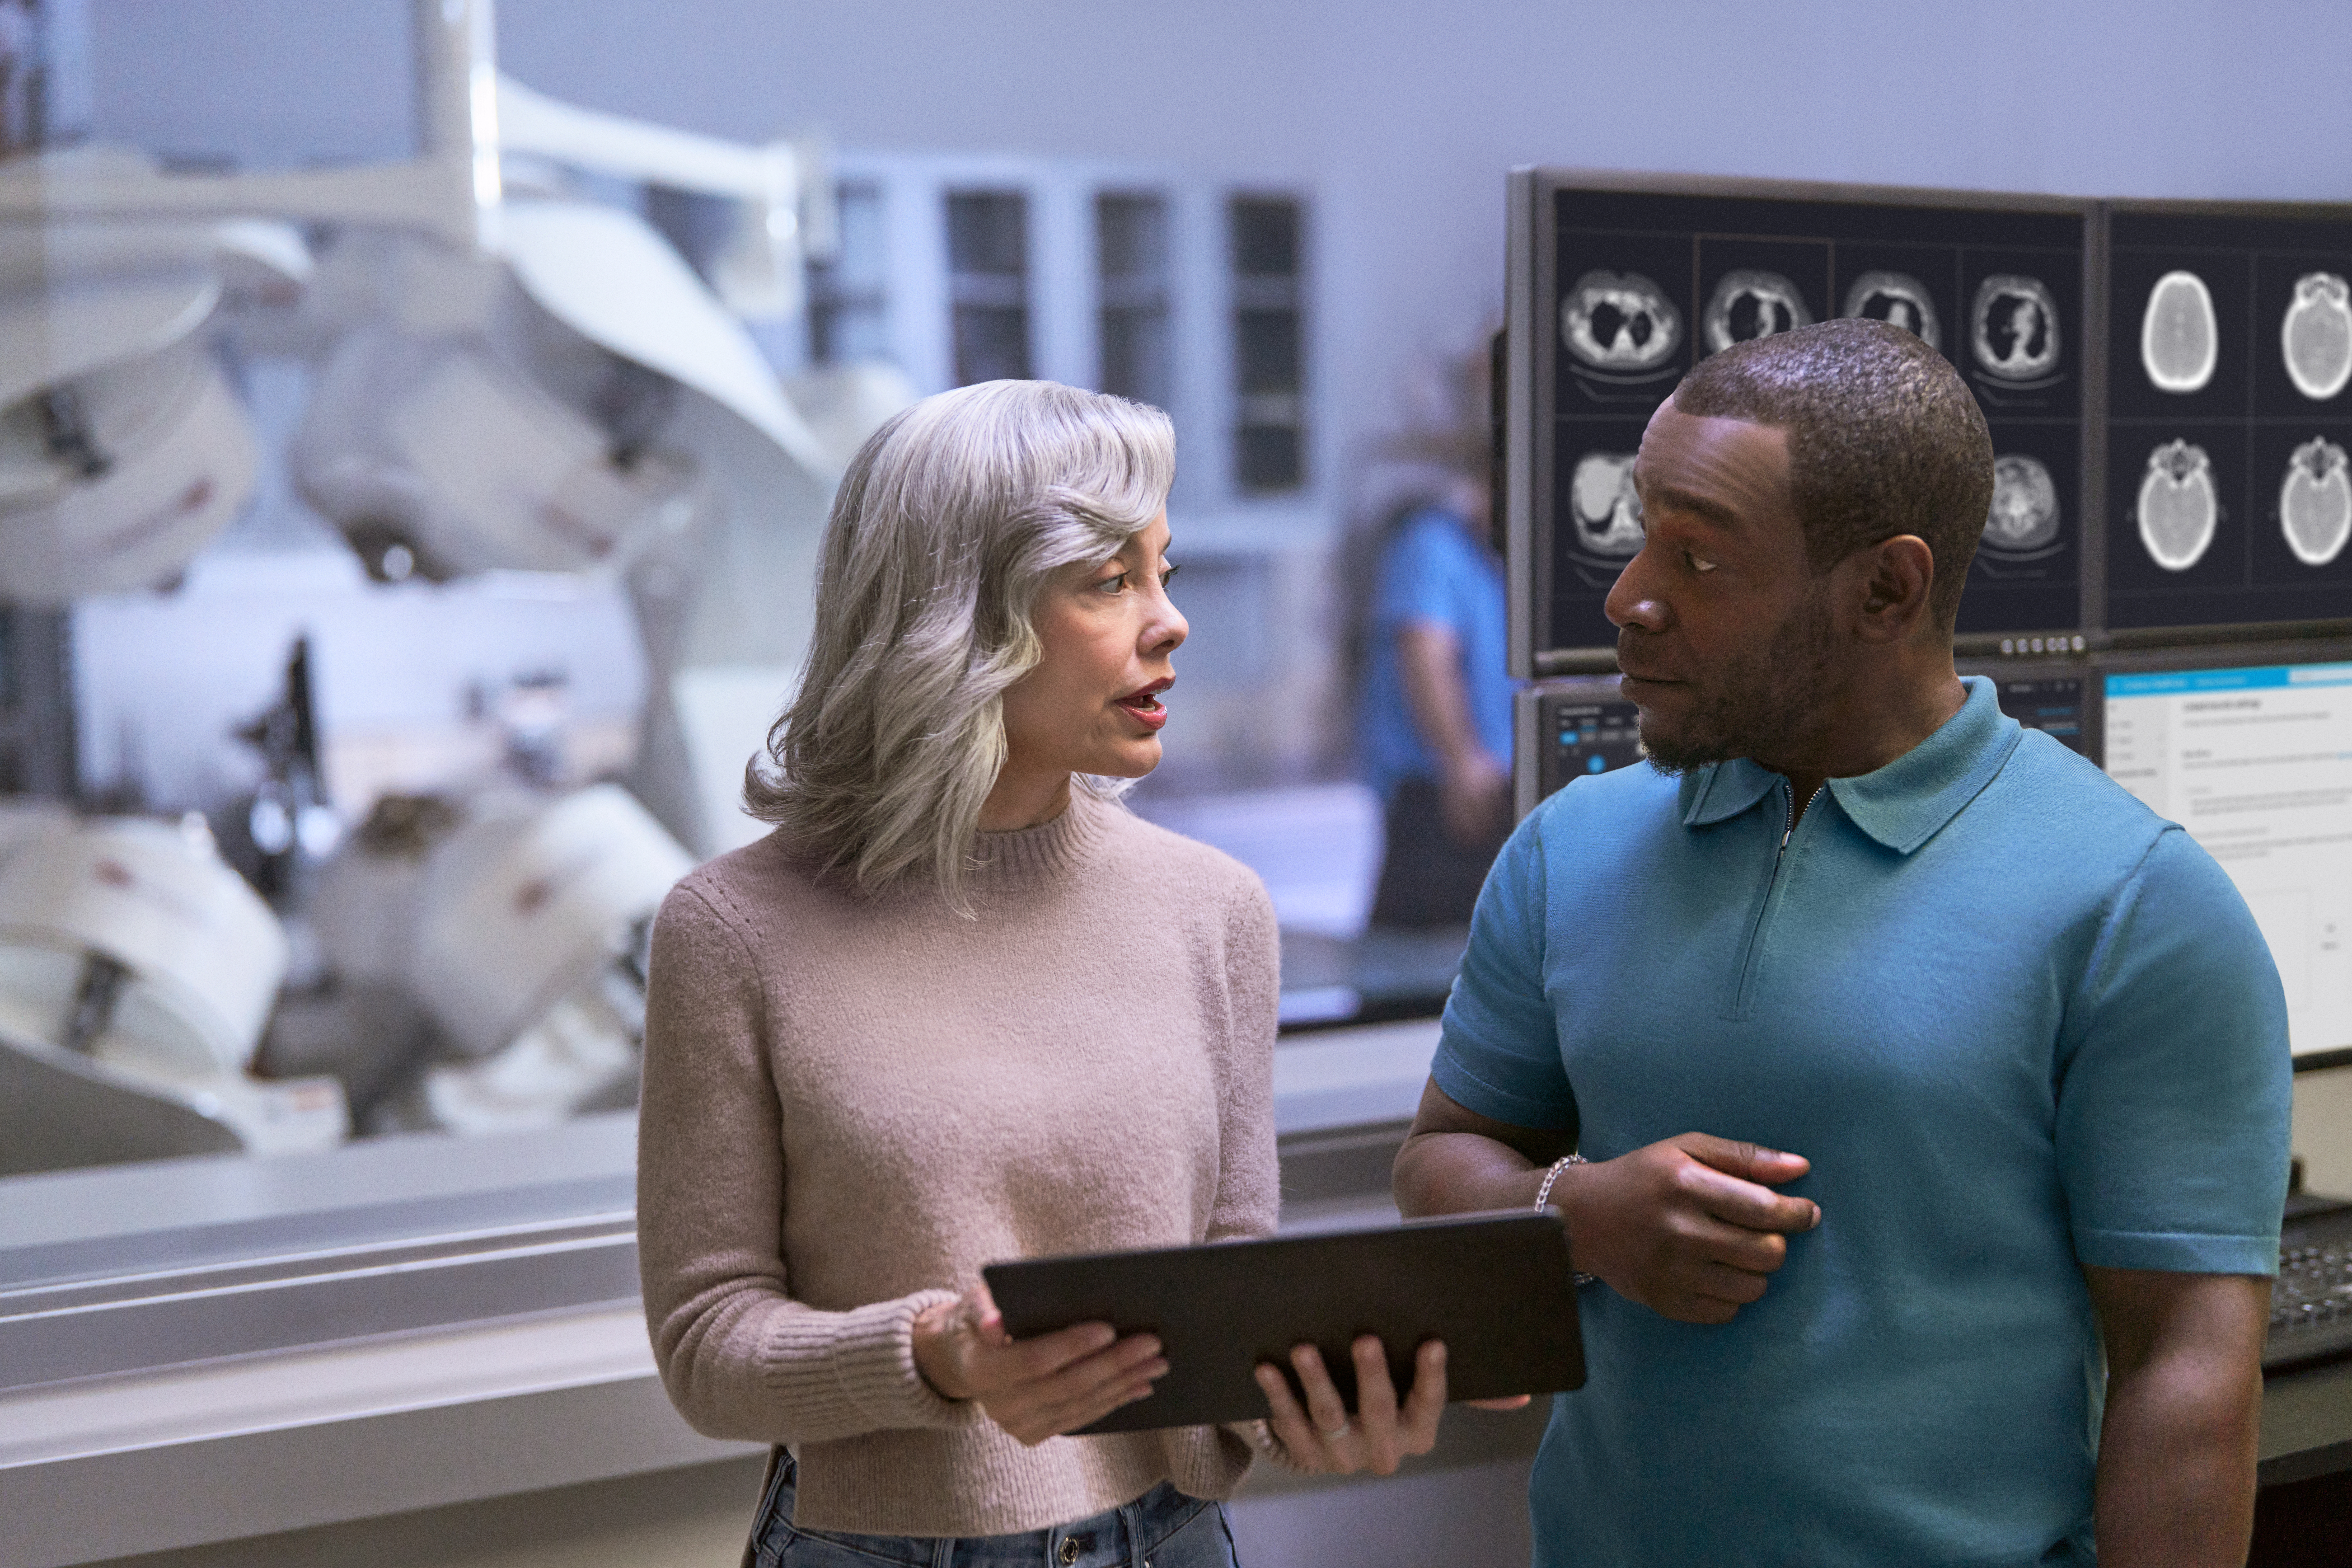 Read more about Transforming Healthcare Innovation: Microsoft for Startups Joins Forces with the AMA Physician Innovation Network to Connect Physicians and Startup Founders